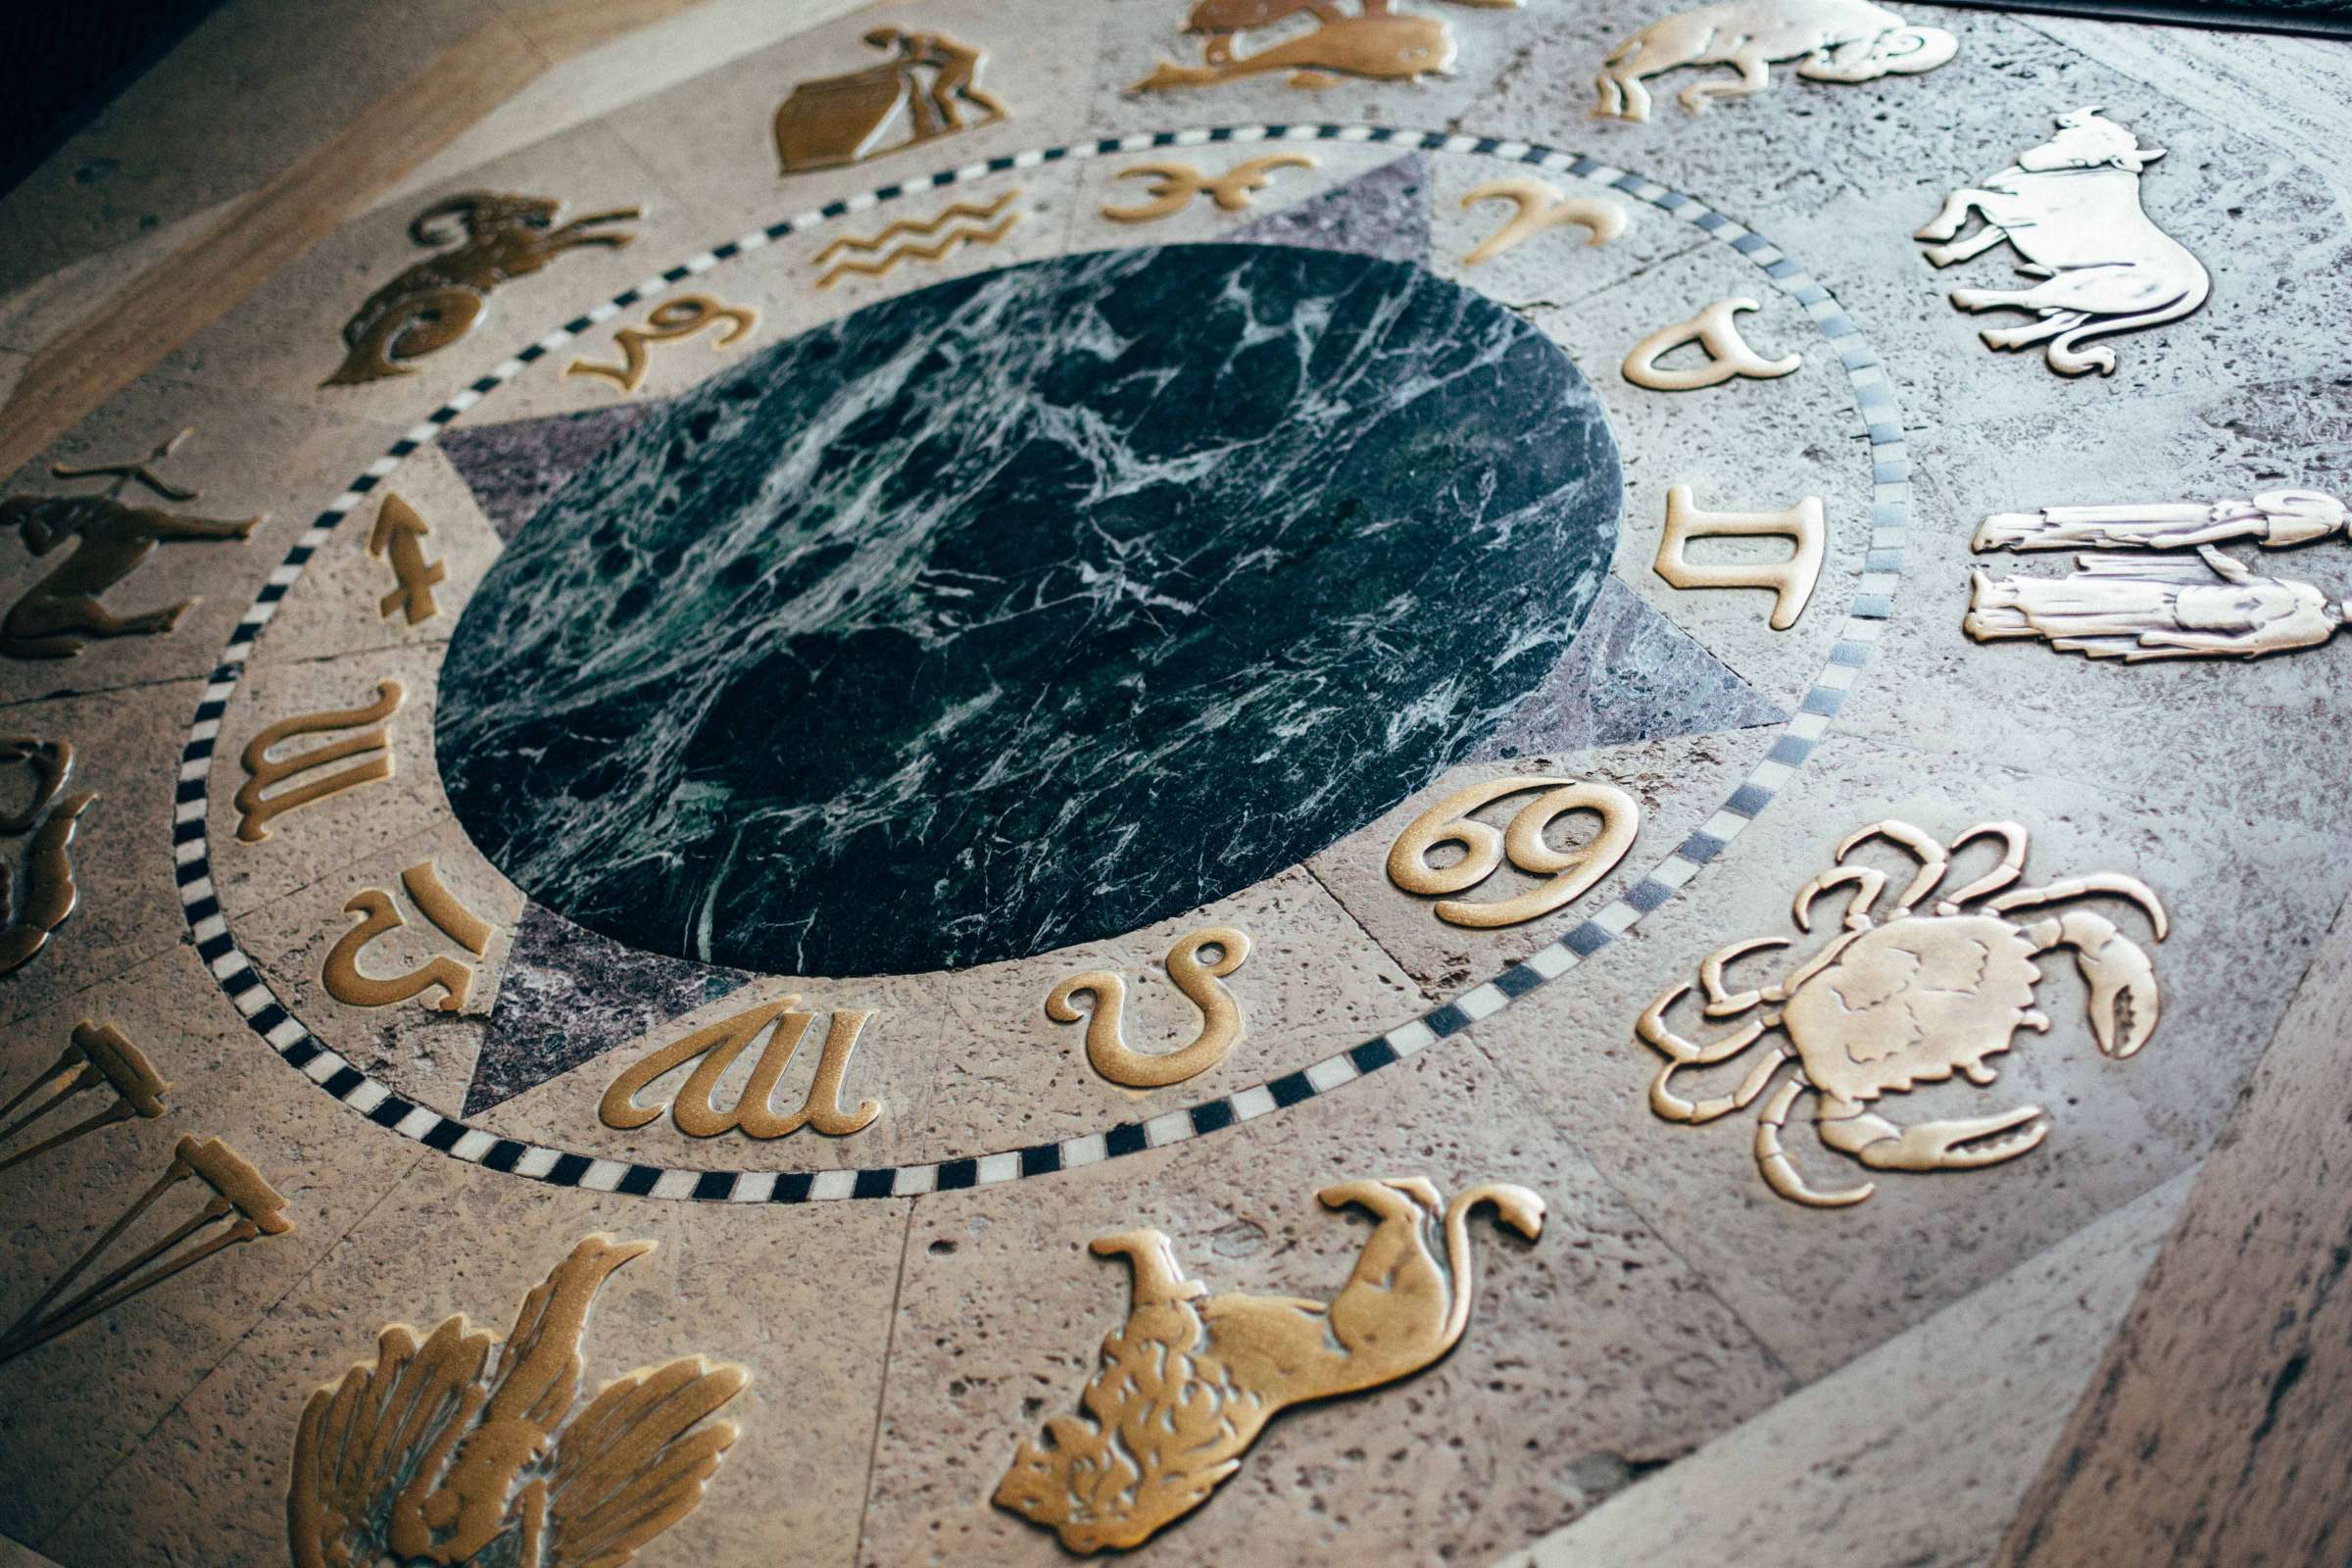 Zodiac on the floor of the Memorial Union.